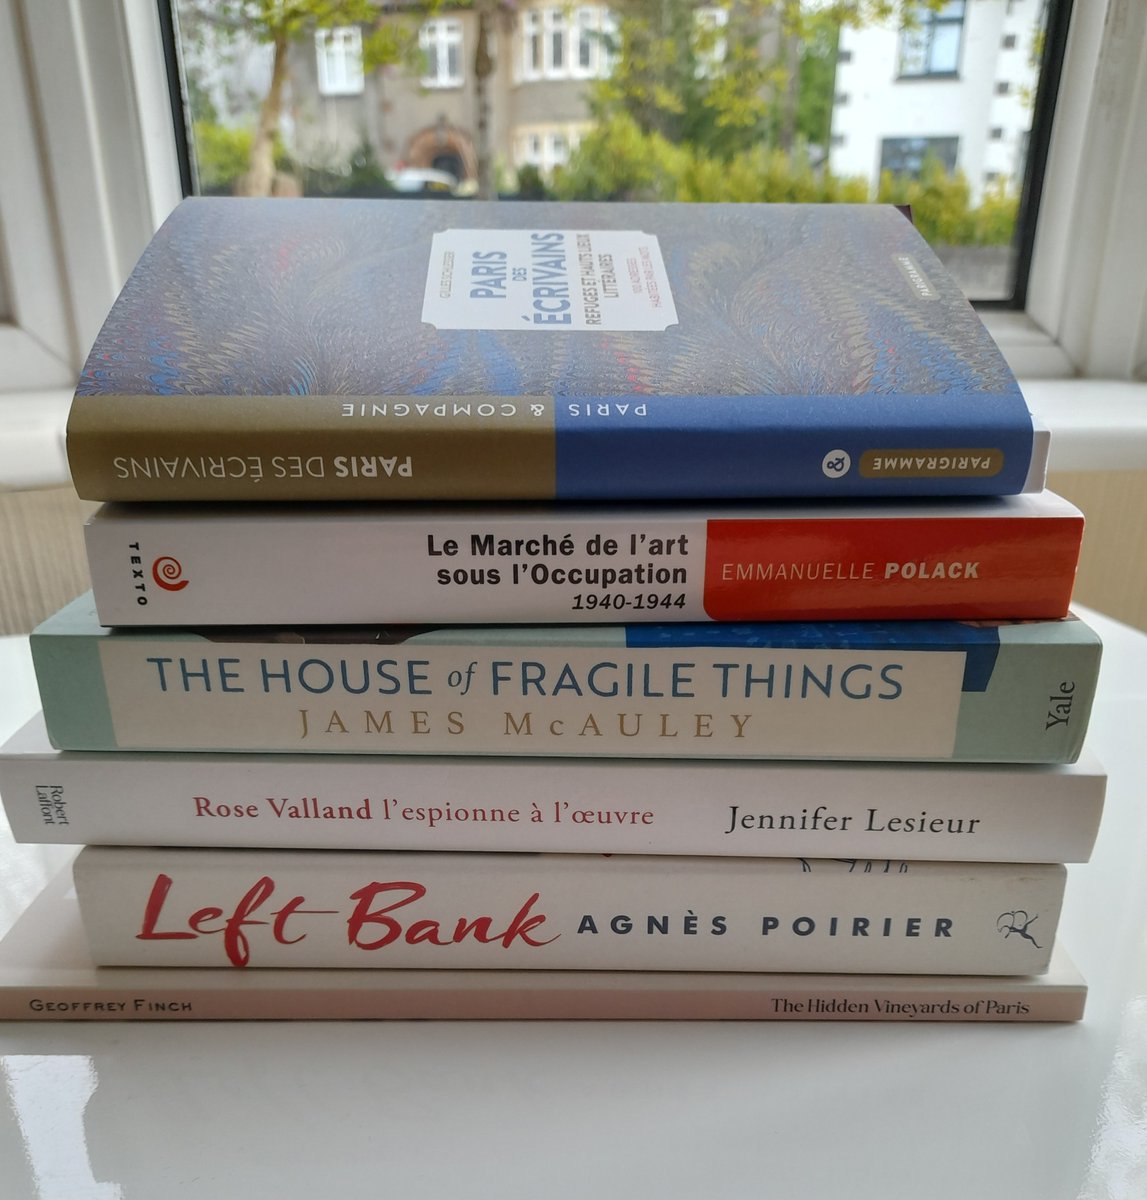 Just some of the book haul that came home from Paris with me. Thank you to all the lovely bookshops that severely depleted my bank balance. I'll be back.